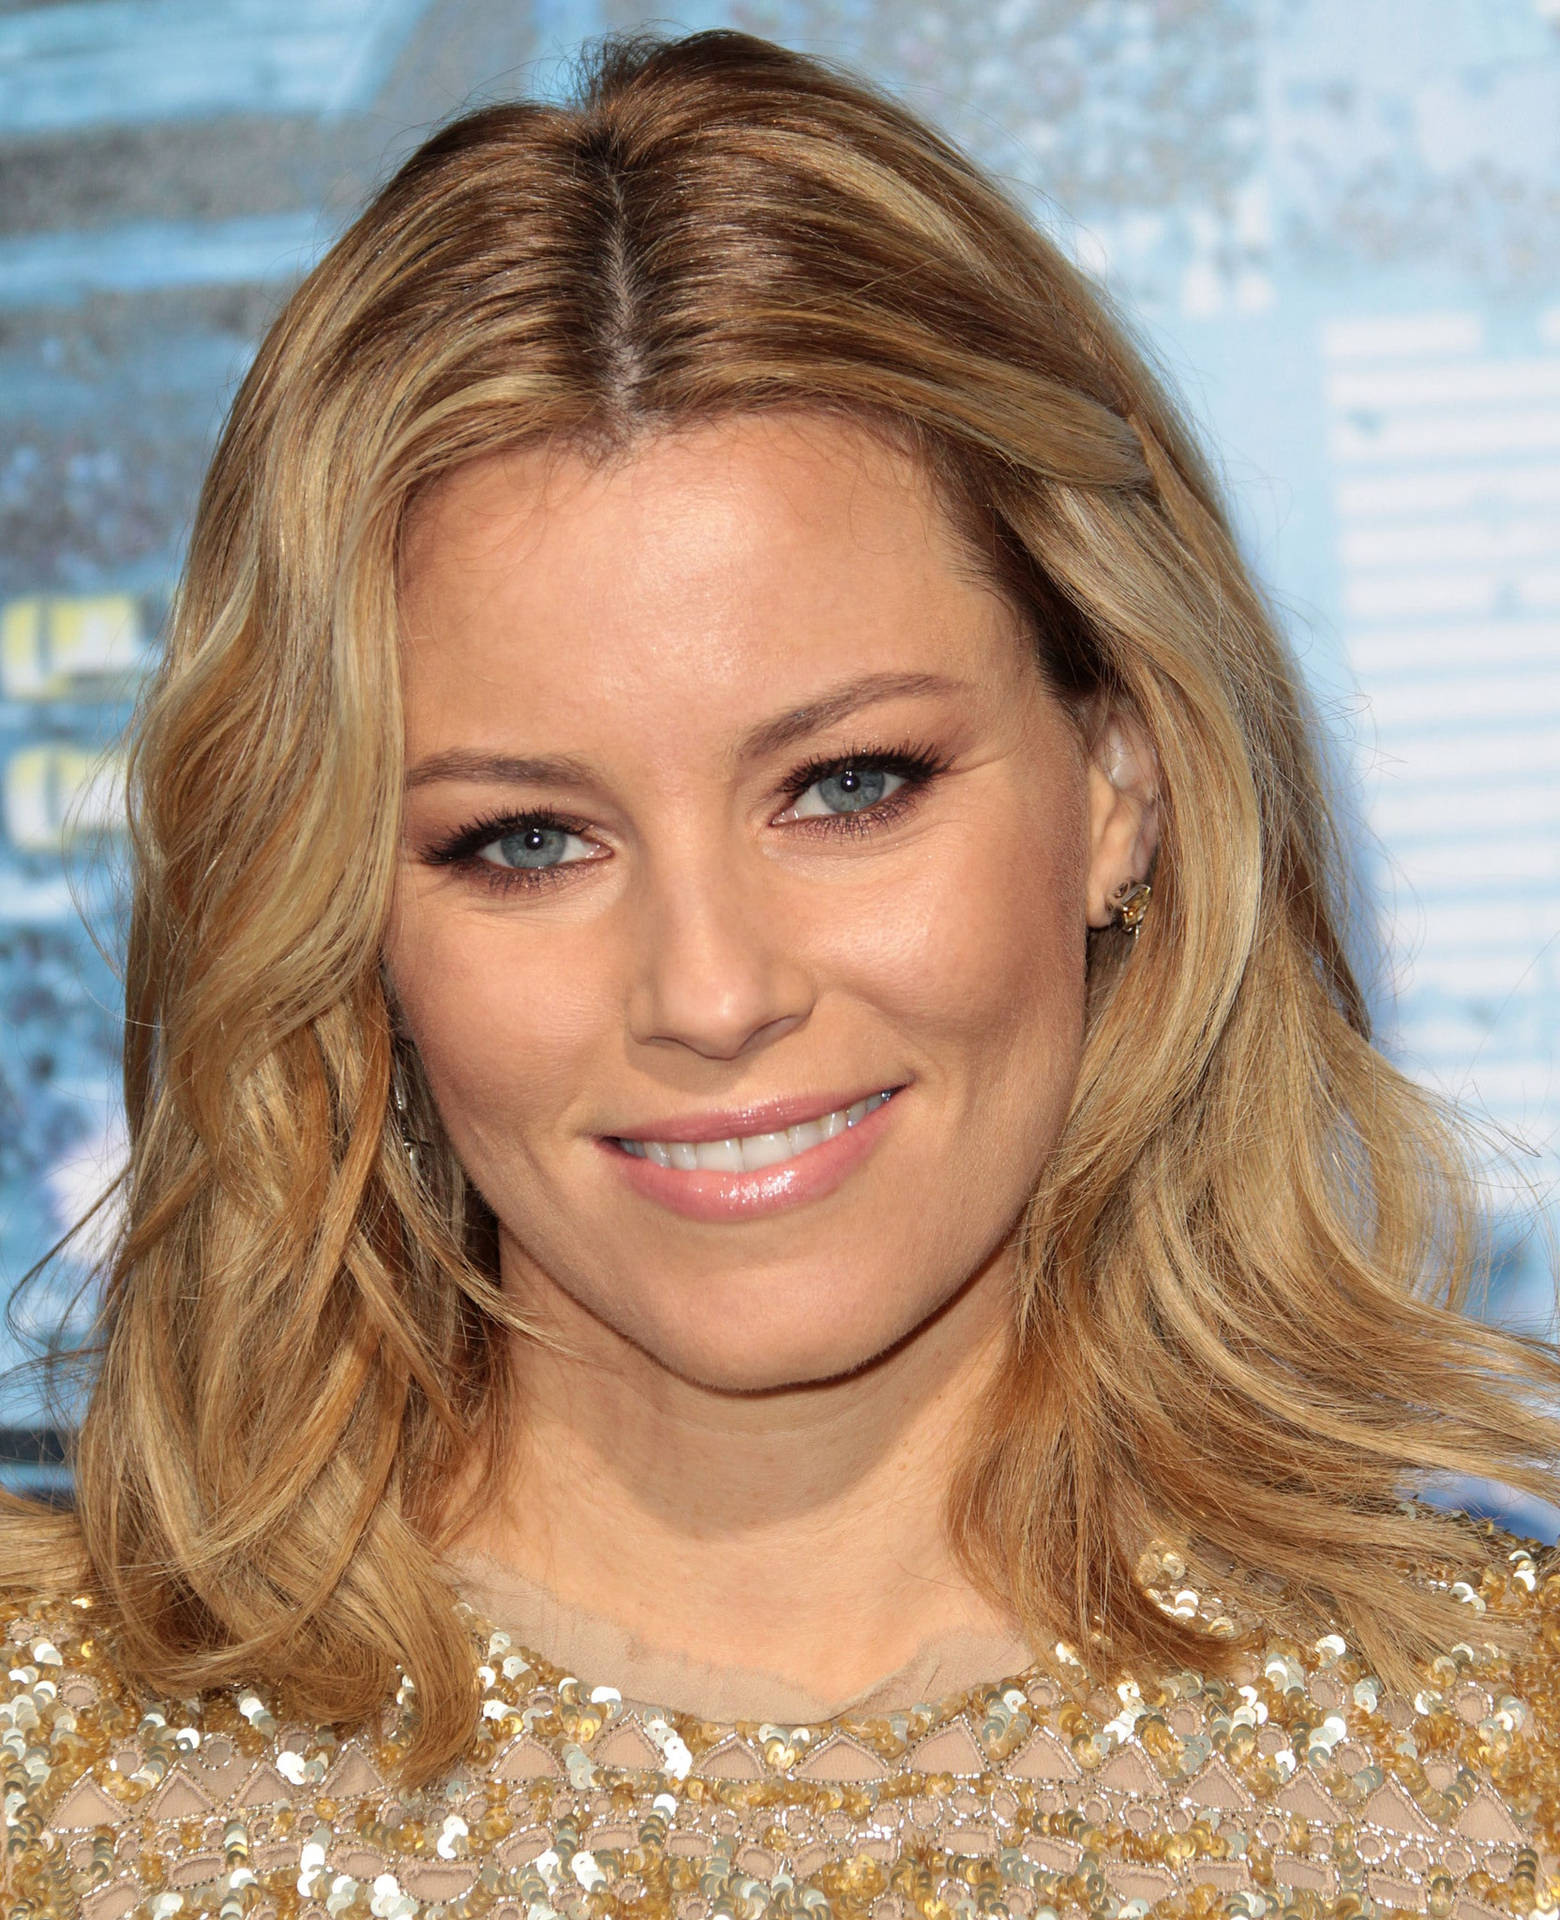 Caption: Elizabeth Banks In Her Role In Pitch Perfect Background